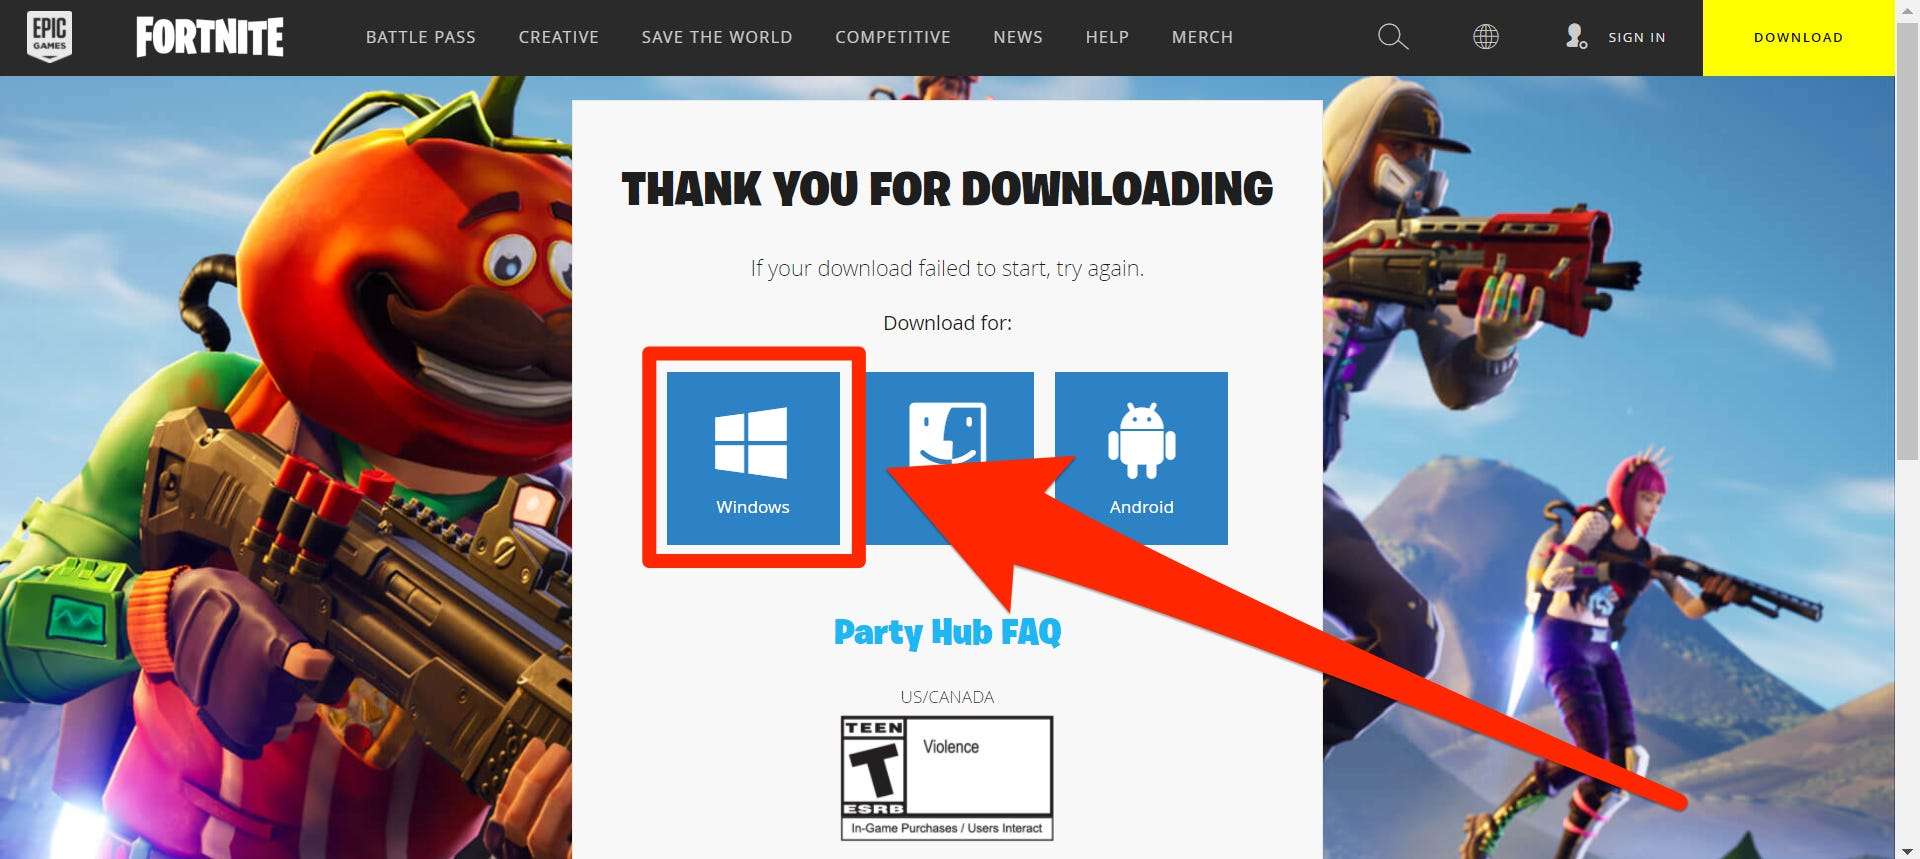 How to download 'Fortnite' on your Windows PC in a few